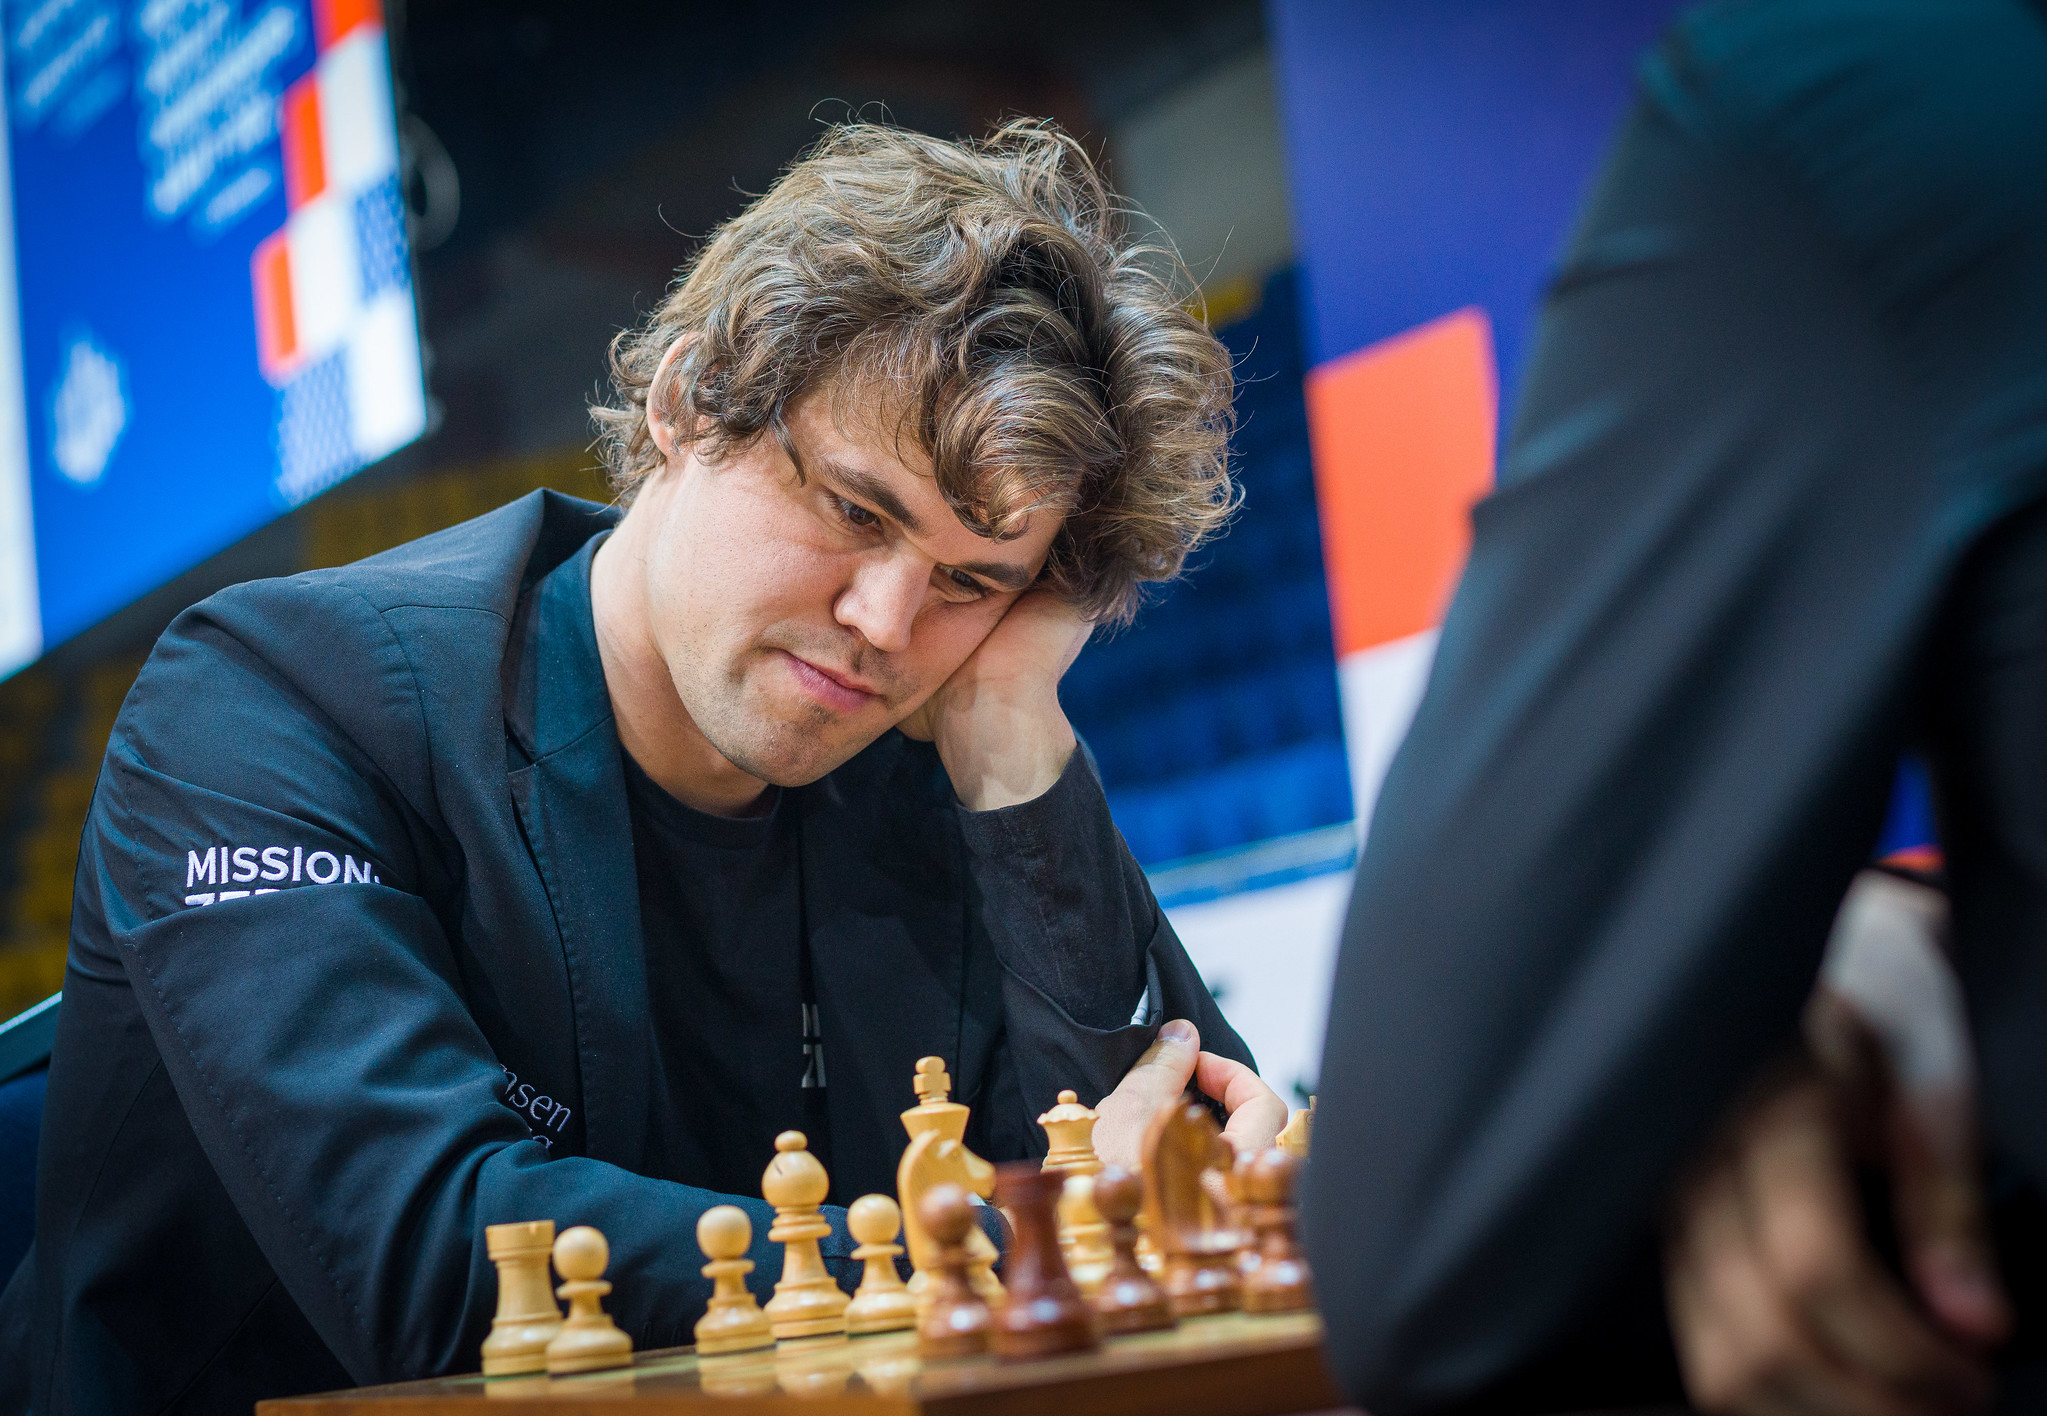 International Chess Federation on X: Magnus Carlsen is the 2022